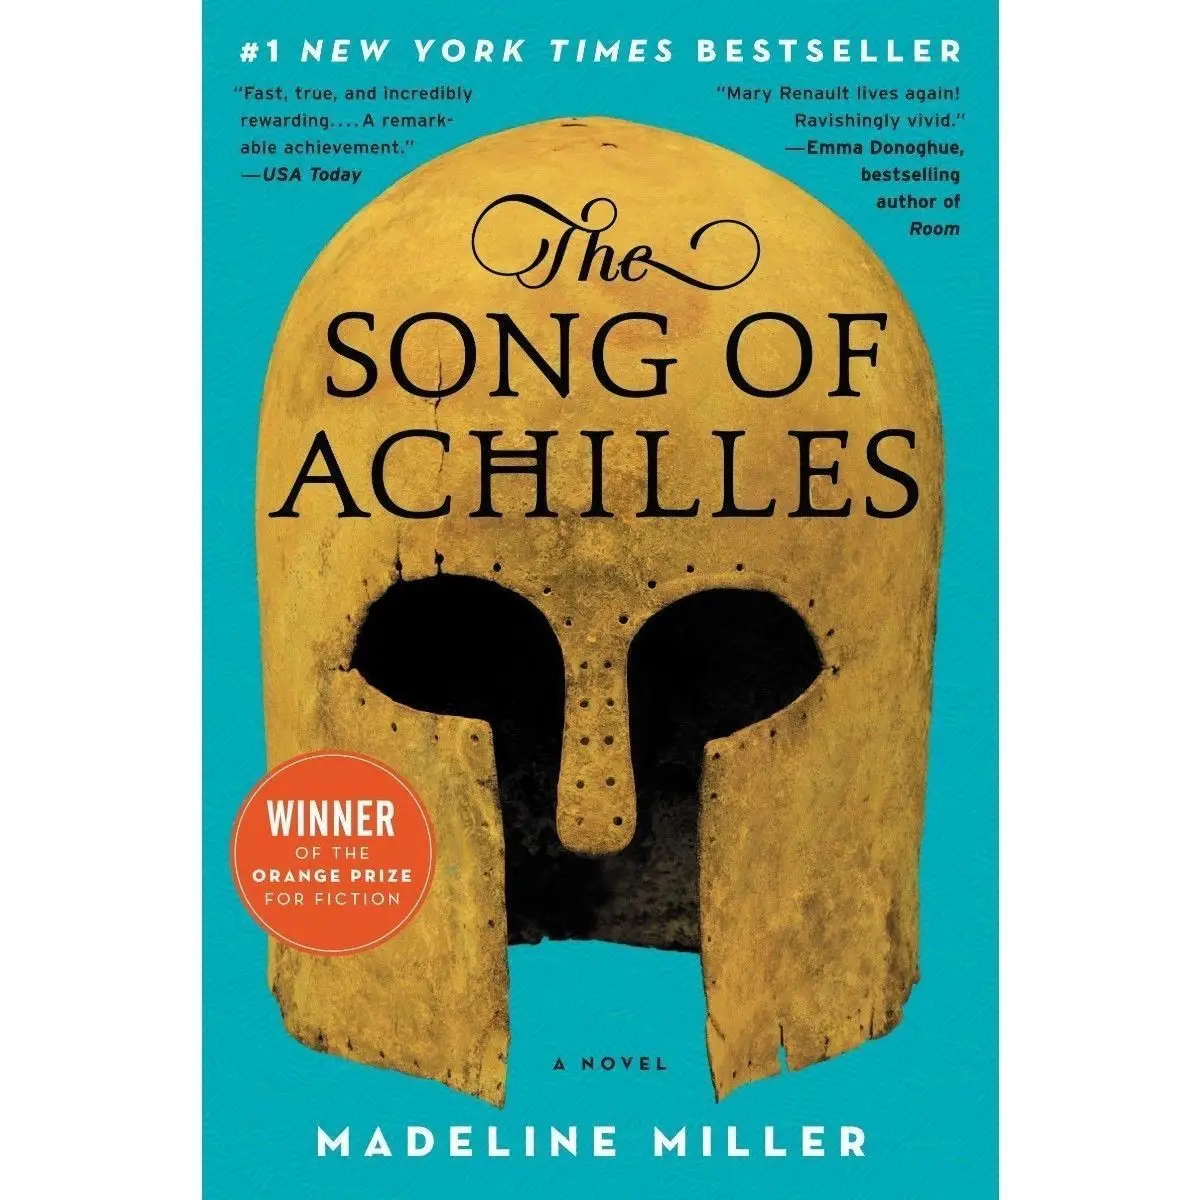 

The Song of Achilles by Madeline Miller A Novel Paperback English Bestseller Book Libros Livros